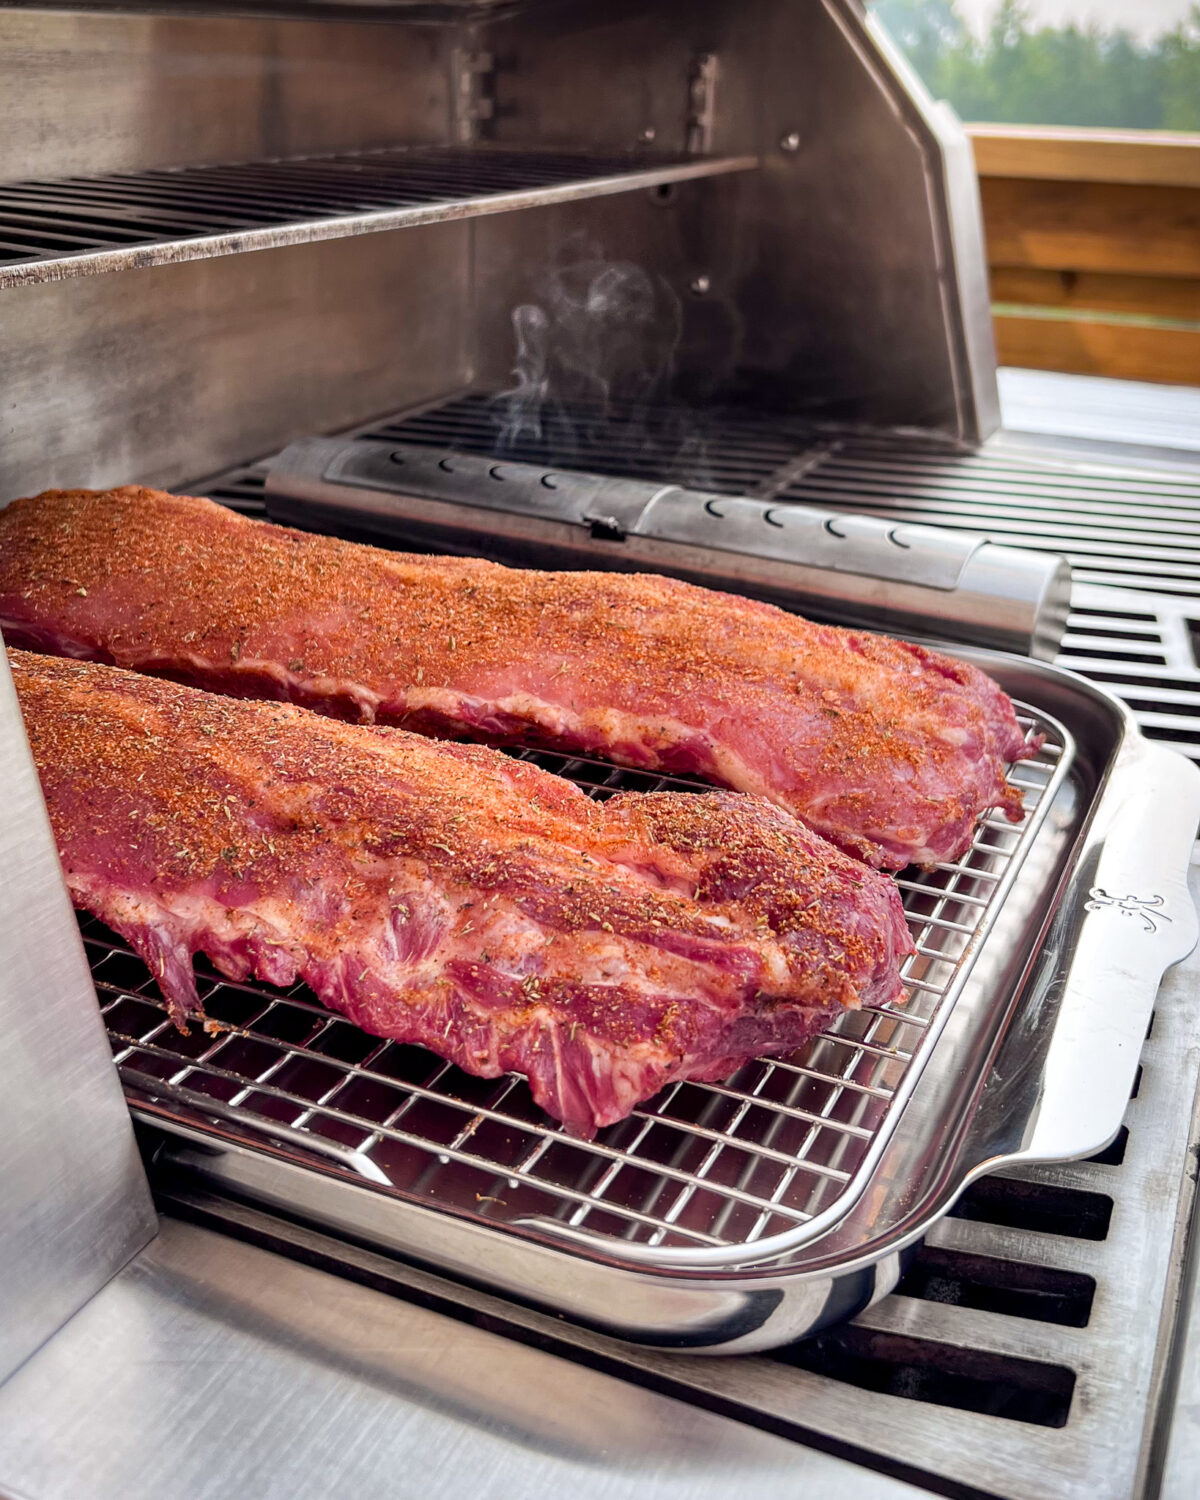 Two racks of ribs, meat side up, on a half sheet pan with a rack placed on the grill.